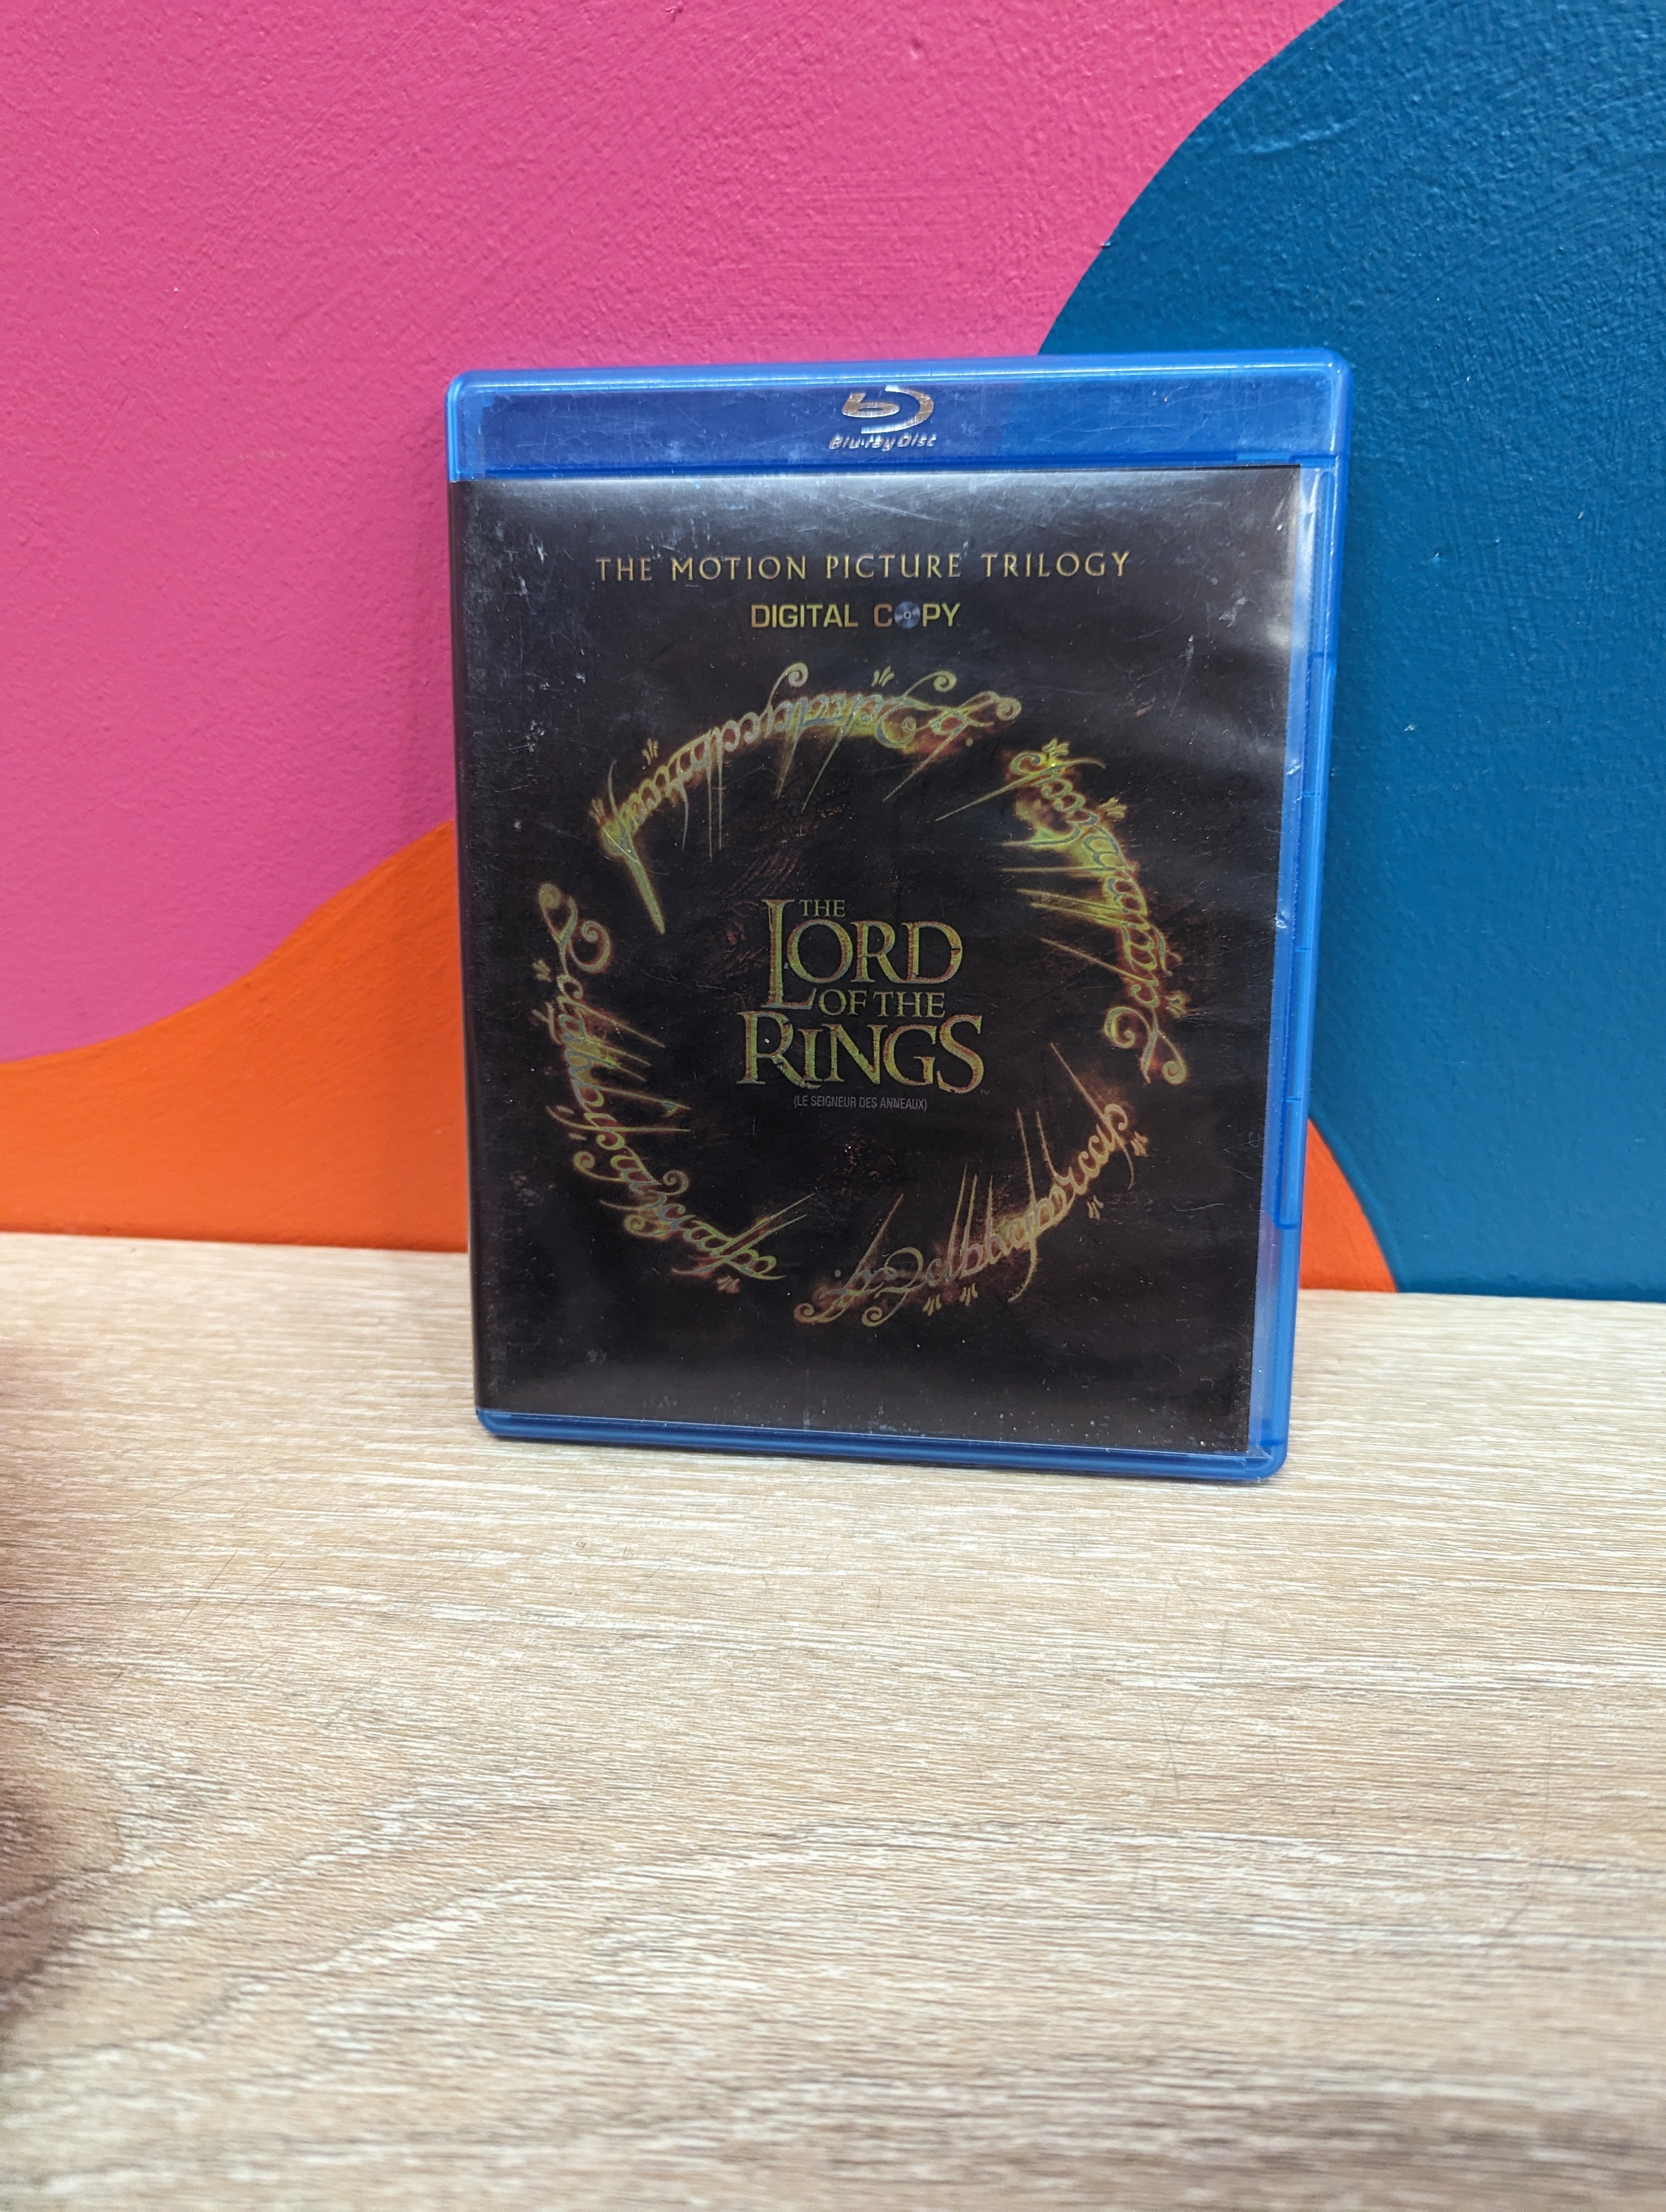 Lord Of The Rings Trilogy (Blu-ray)